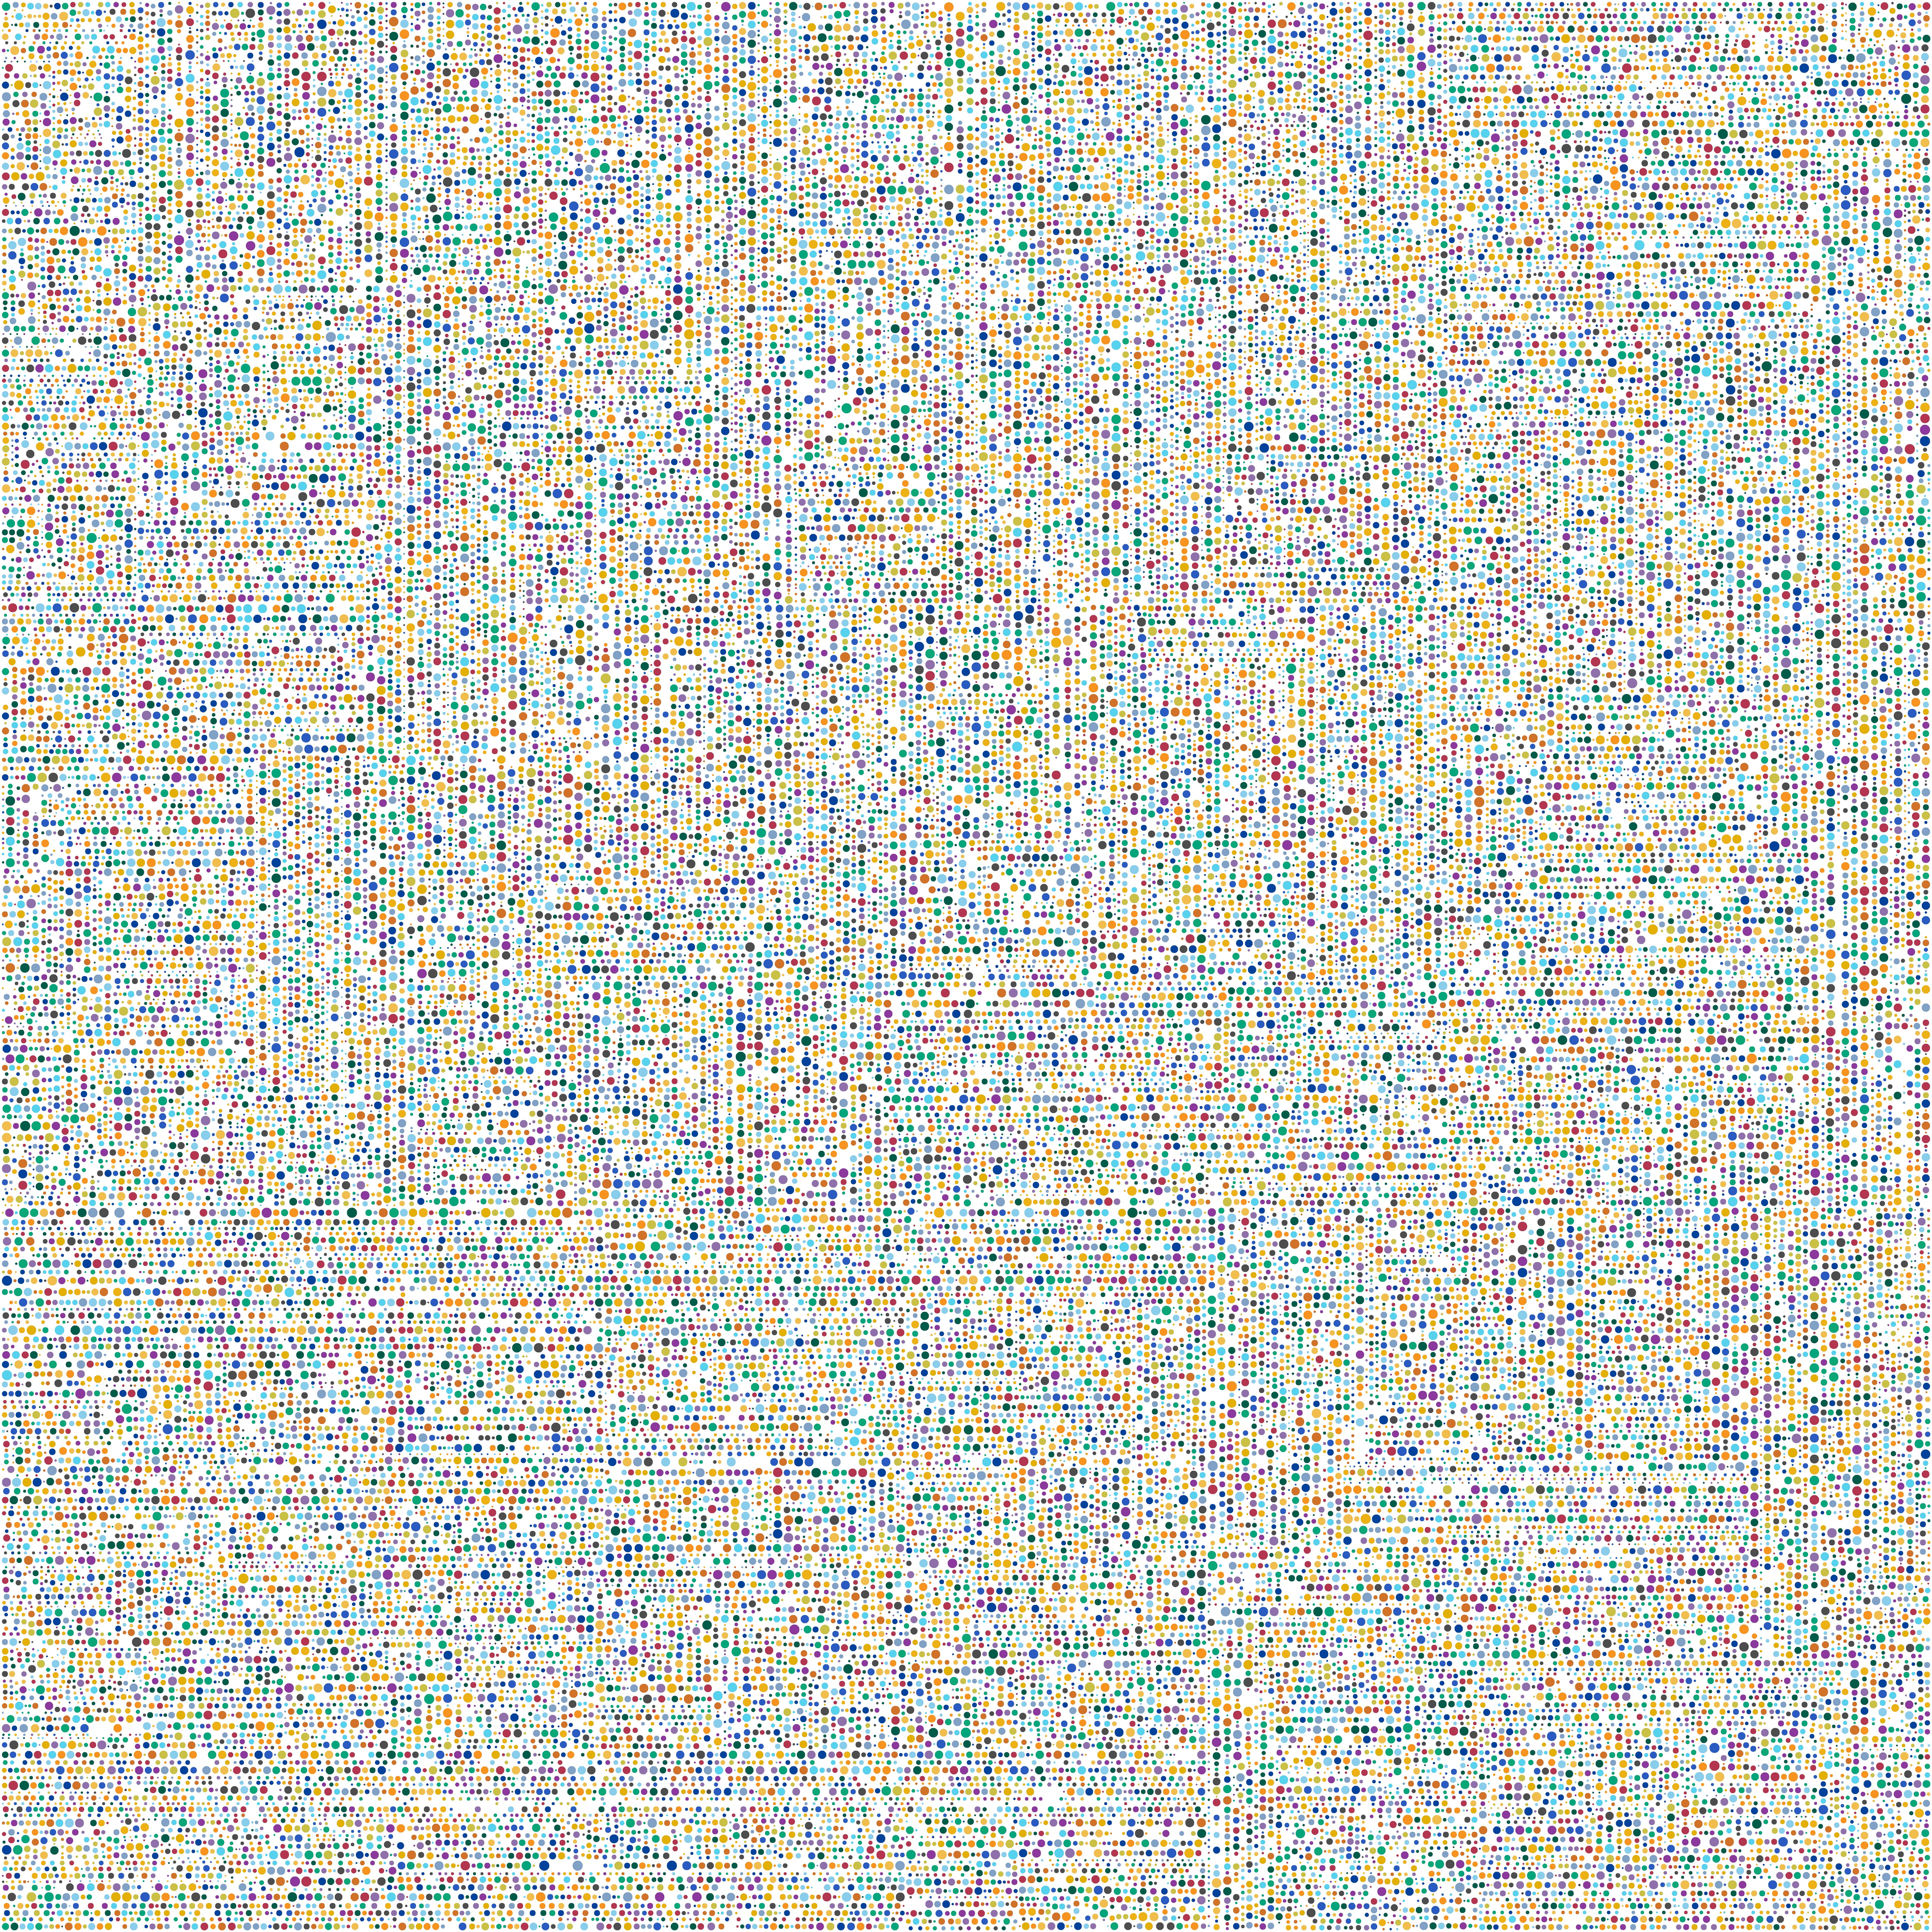 'BTC Bright 67277’ - 1/1 Abstract NFT Art - Bitcoin All-Time-High - MooniTooki Project – @6480 x 6480 pixels - 2022 NFT Release #2